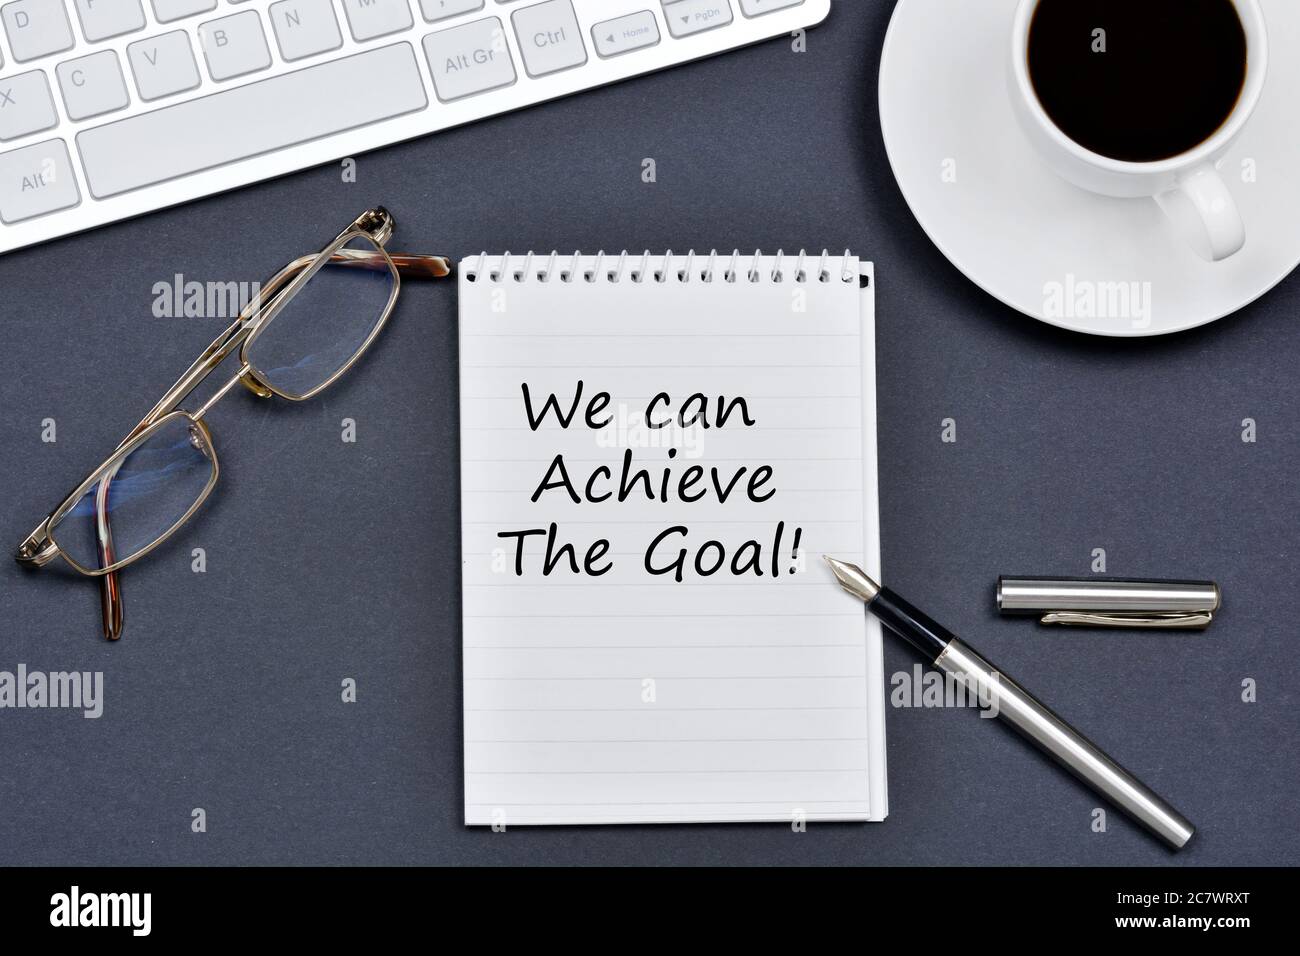 We can achieve the goal. Text on notebook on a black background Stock Photo